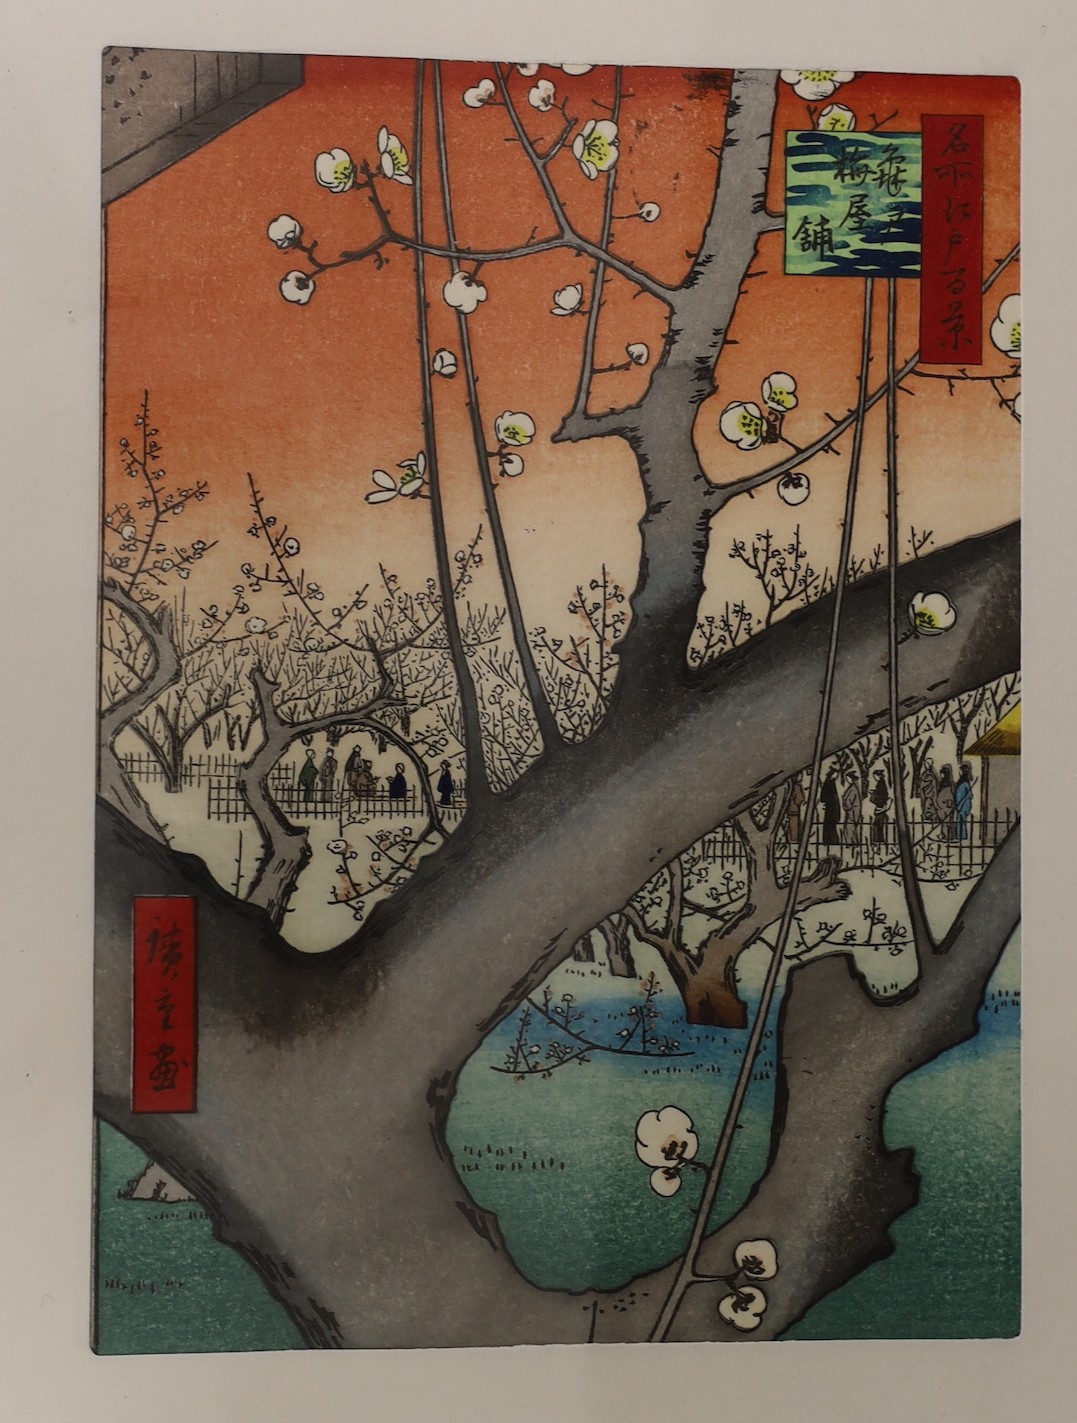 Hiroshige Ando (1797-1858), four woodblock prints from the Views of Edo, largest overall 26 x 35cm